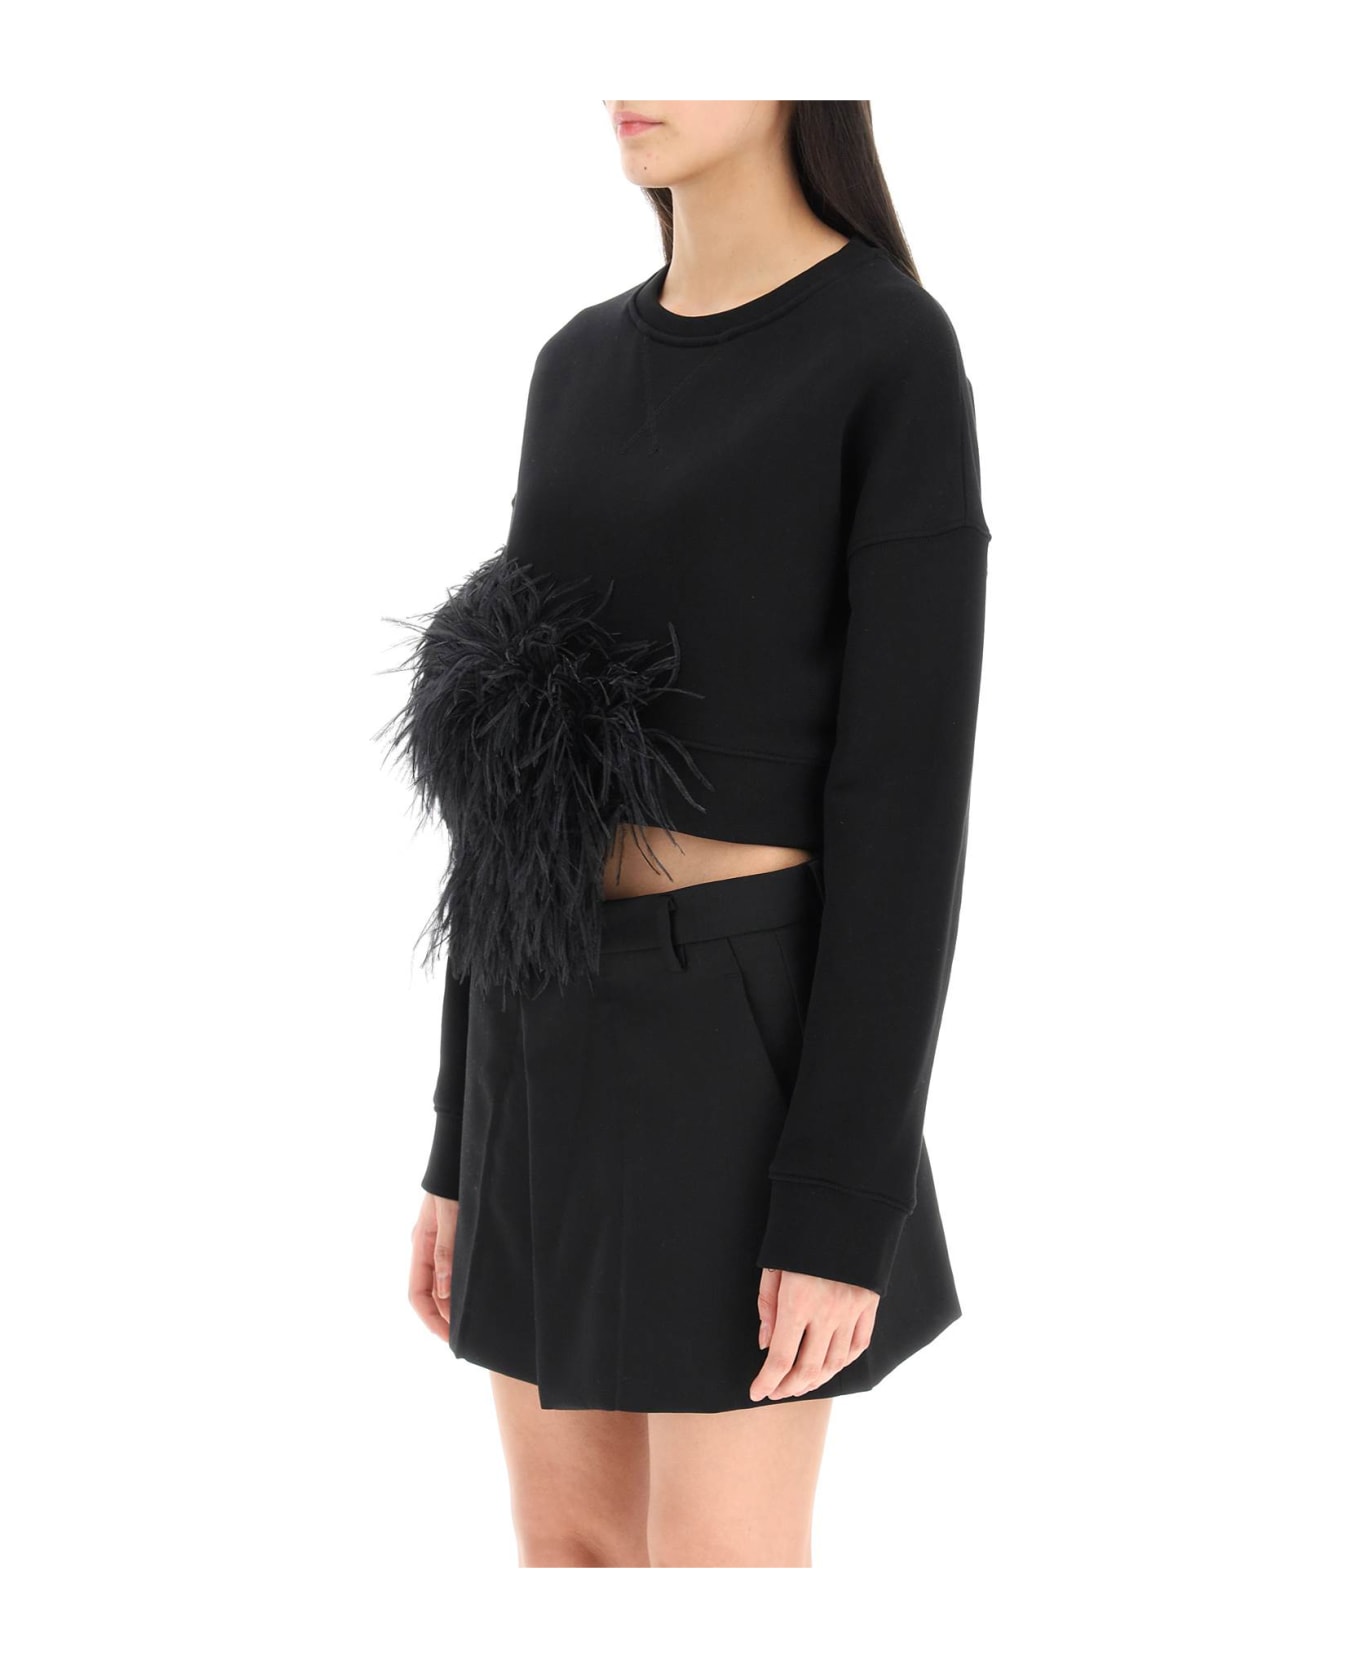 N.21 Cropped Sweatshirt With Feathers - NERO (Black)